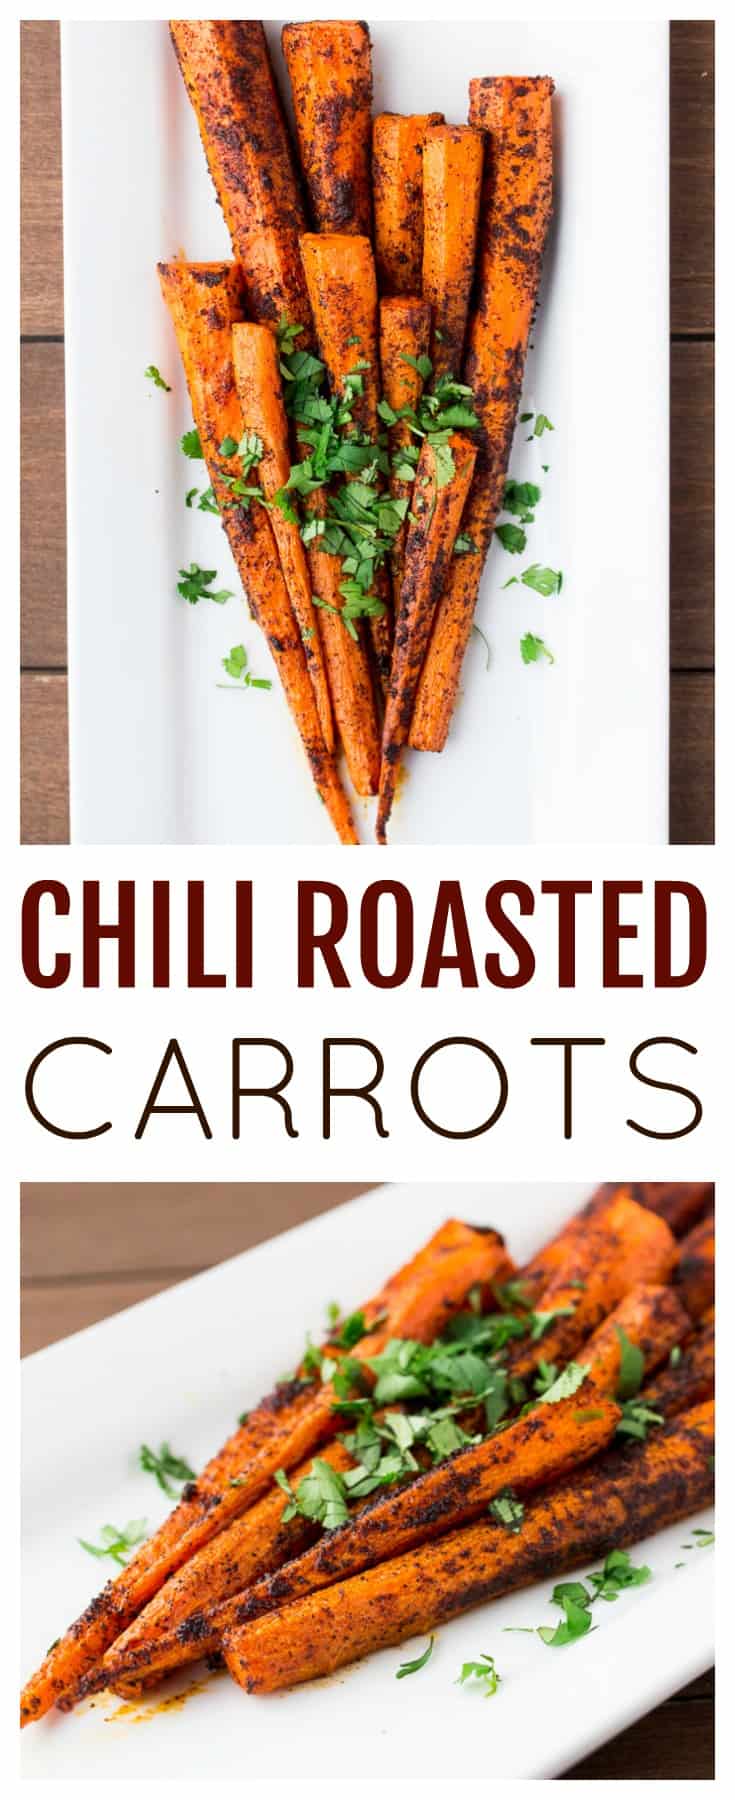 Roasted Chili Spiced Carrots pair amazingly with simple seared chicken breasts, steak, turkey, or even pork! This is a such an easy side dish recipe! | #dlbrecipes #roastedcarrots #carrotsidedish #sidedish #carrots #chilicarrots